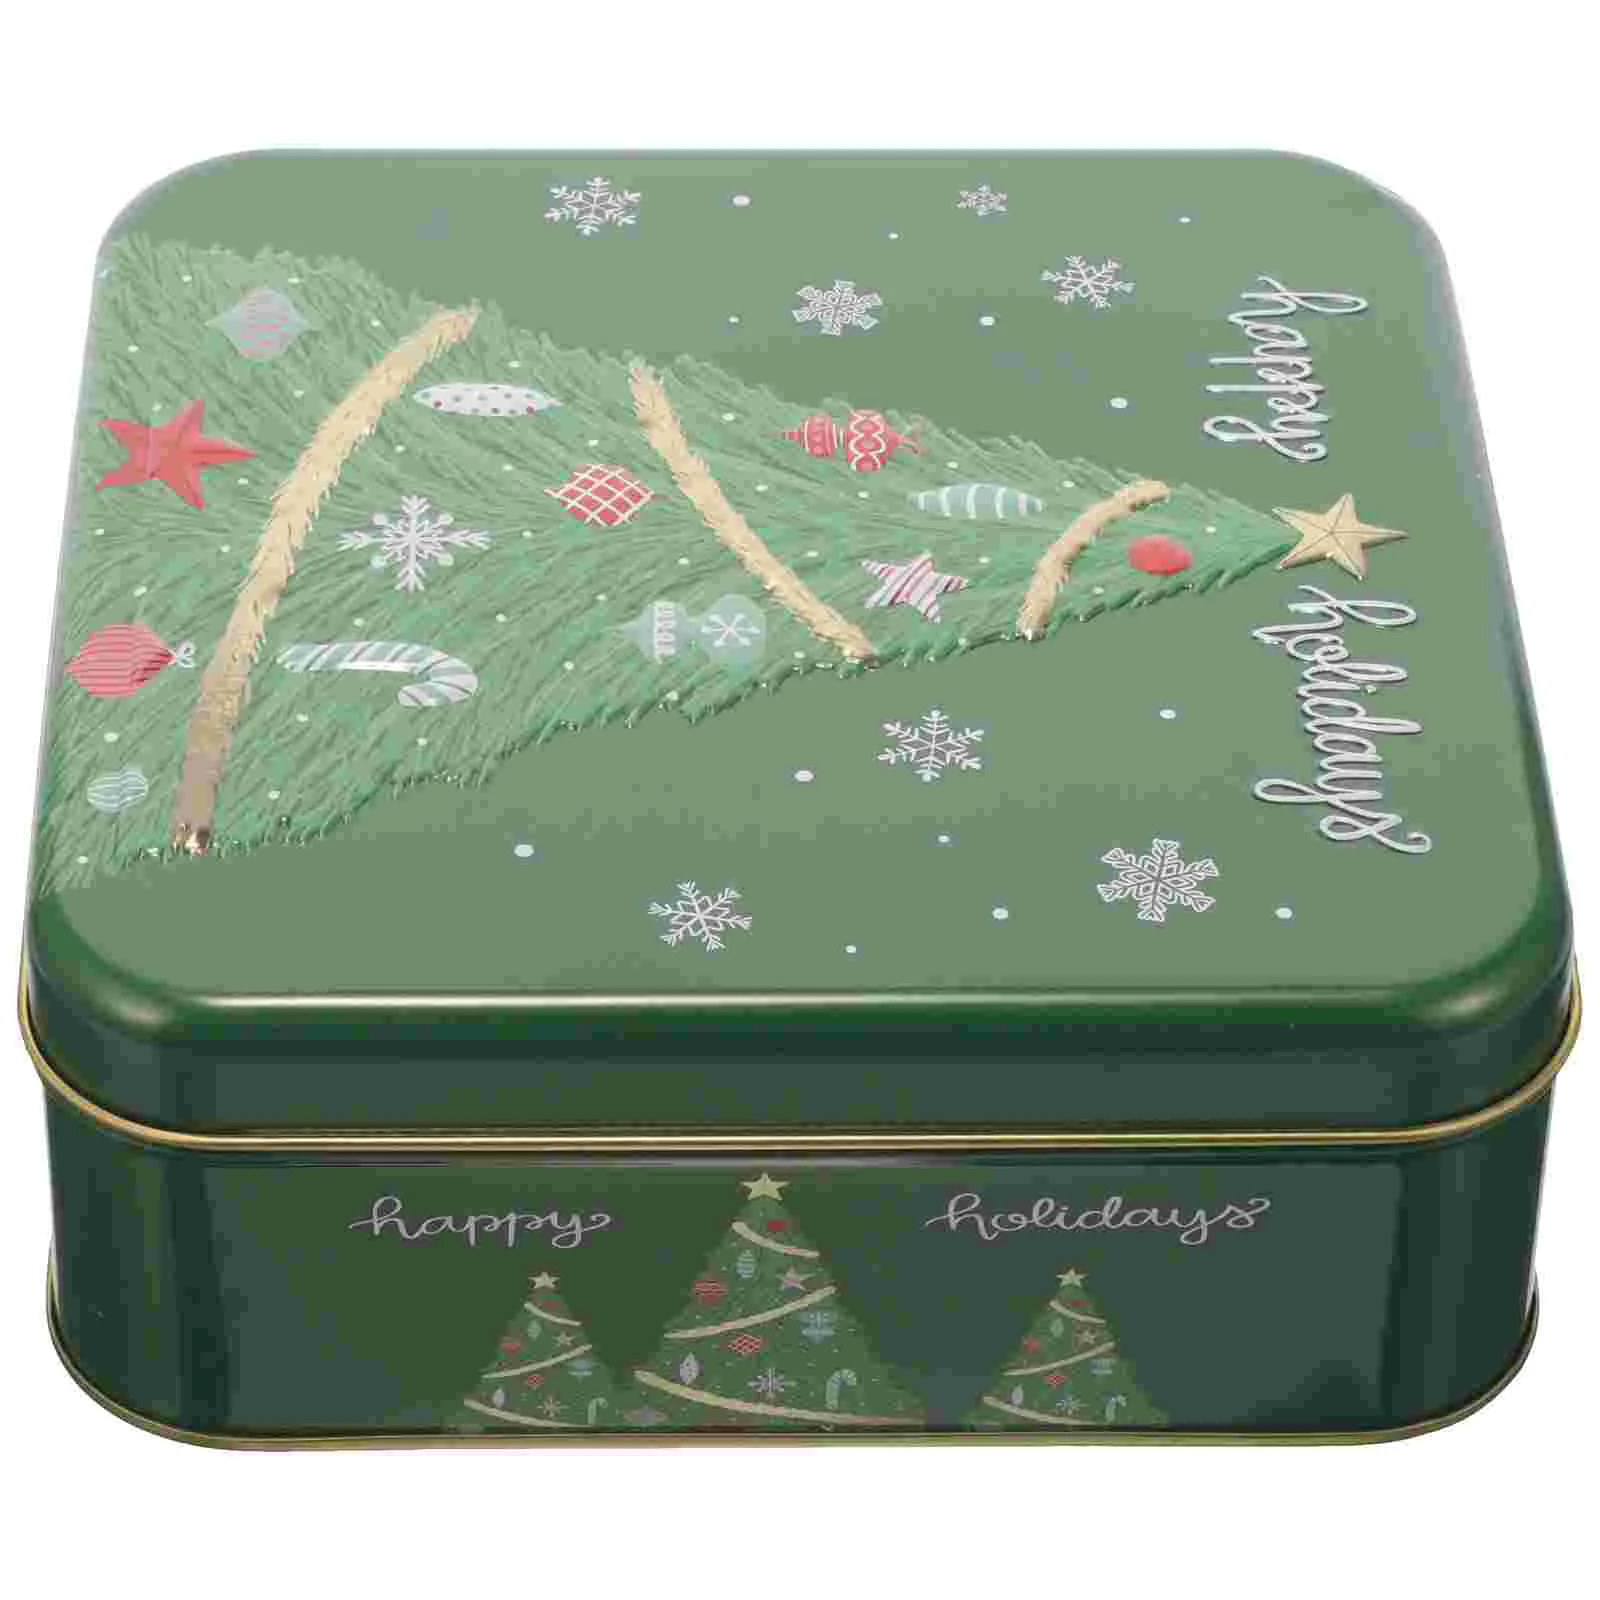 

Christmas Gift Box Cookie Tin Chocolate Gifts Containers Party Tins Lids Giving Jar